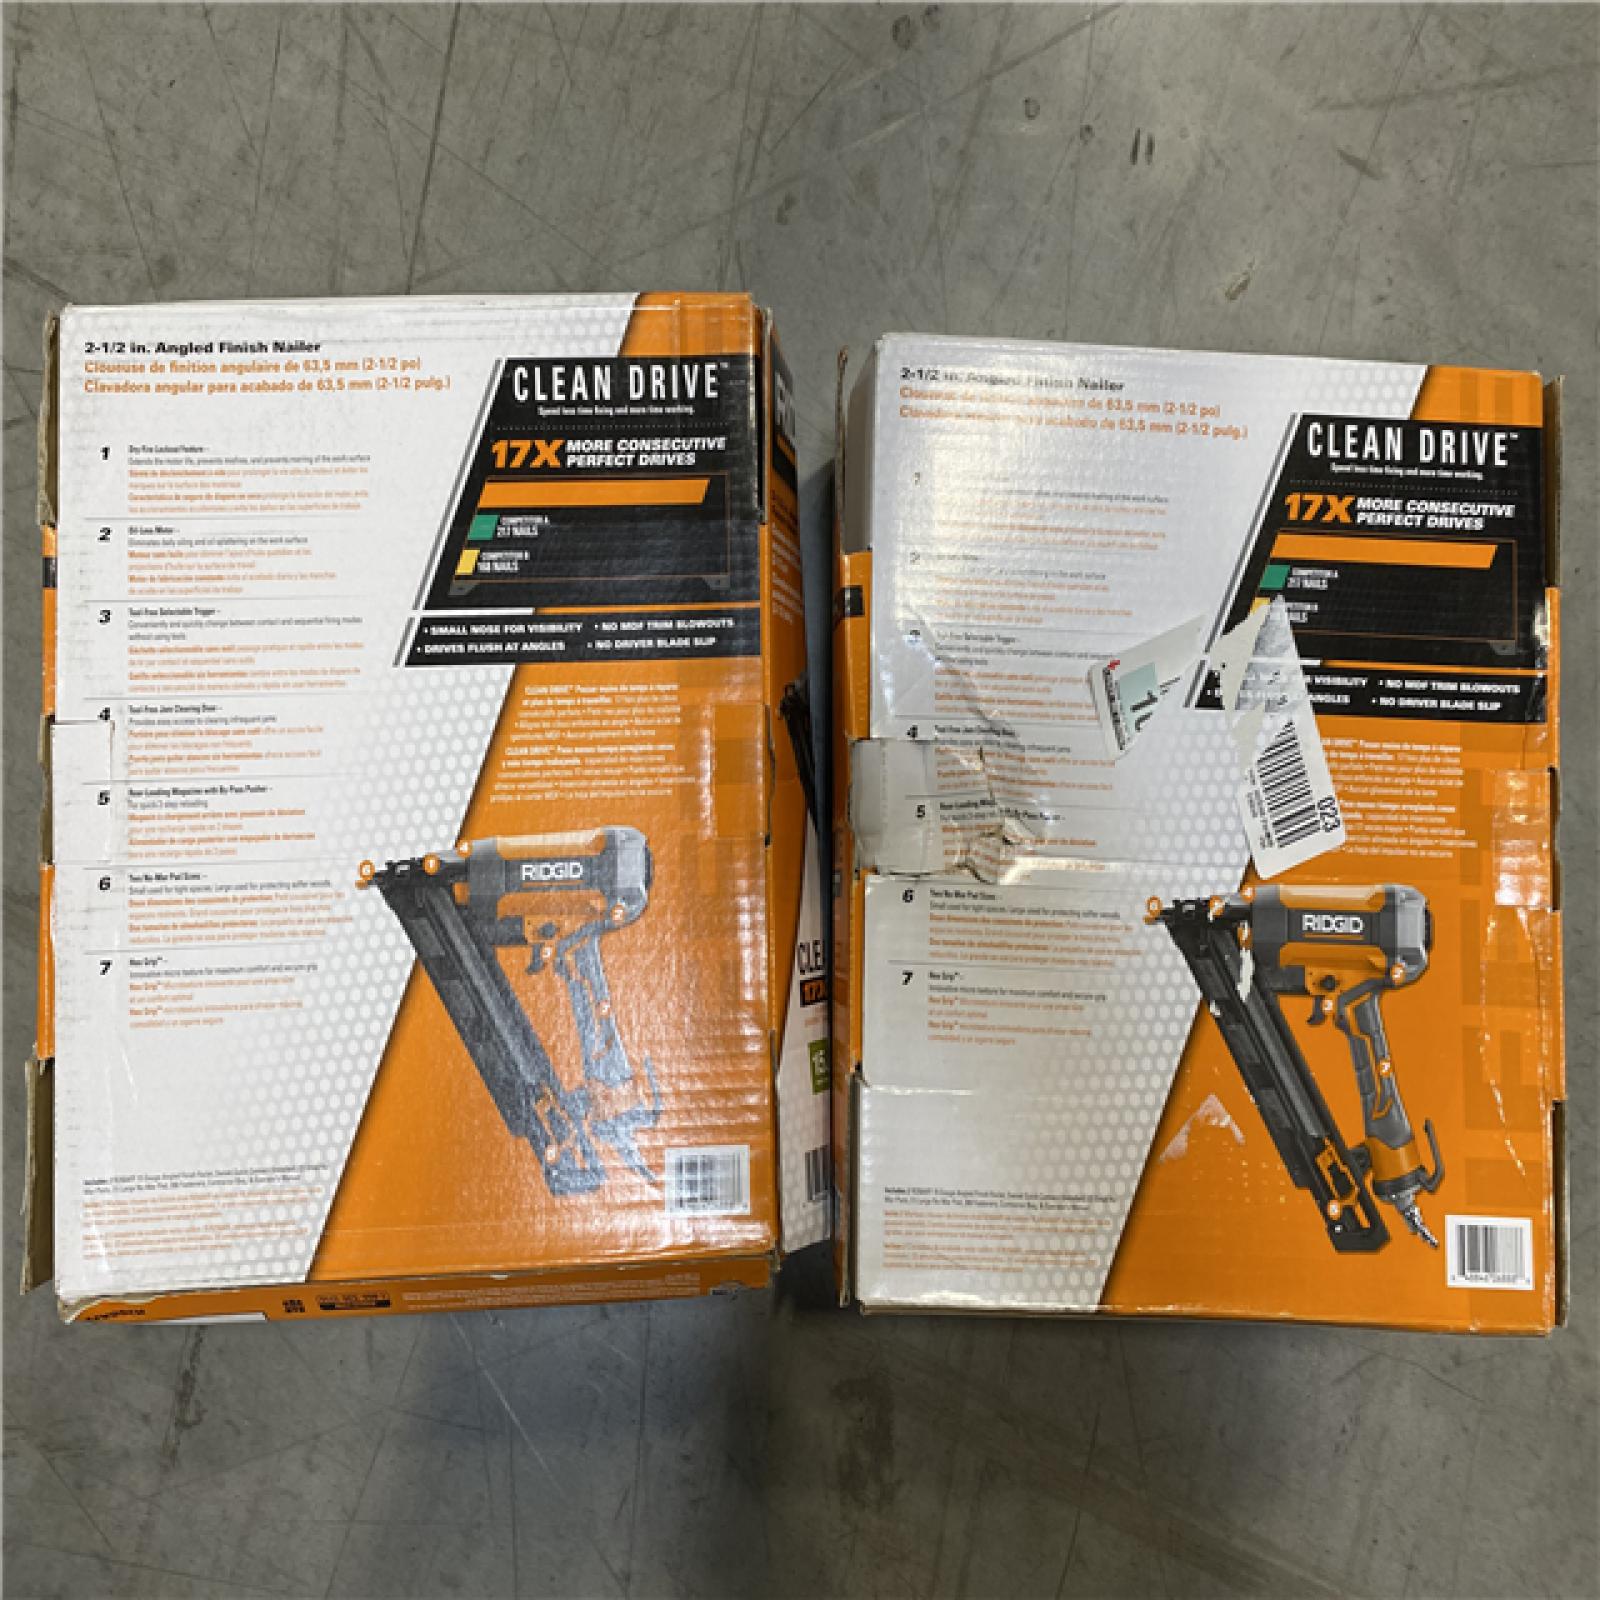 DALLAS LOCATION -RIDGID Pneumatic 15-Gauge 2-1/2 in. Angled Finish Nailer with CLEAN DRIVE Technology, Tool Bag, and Sample Nails